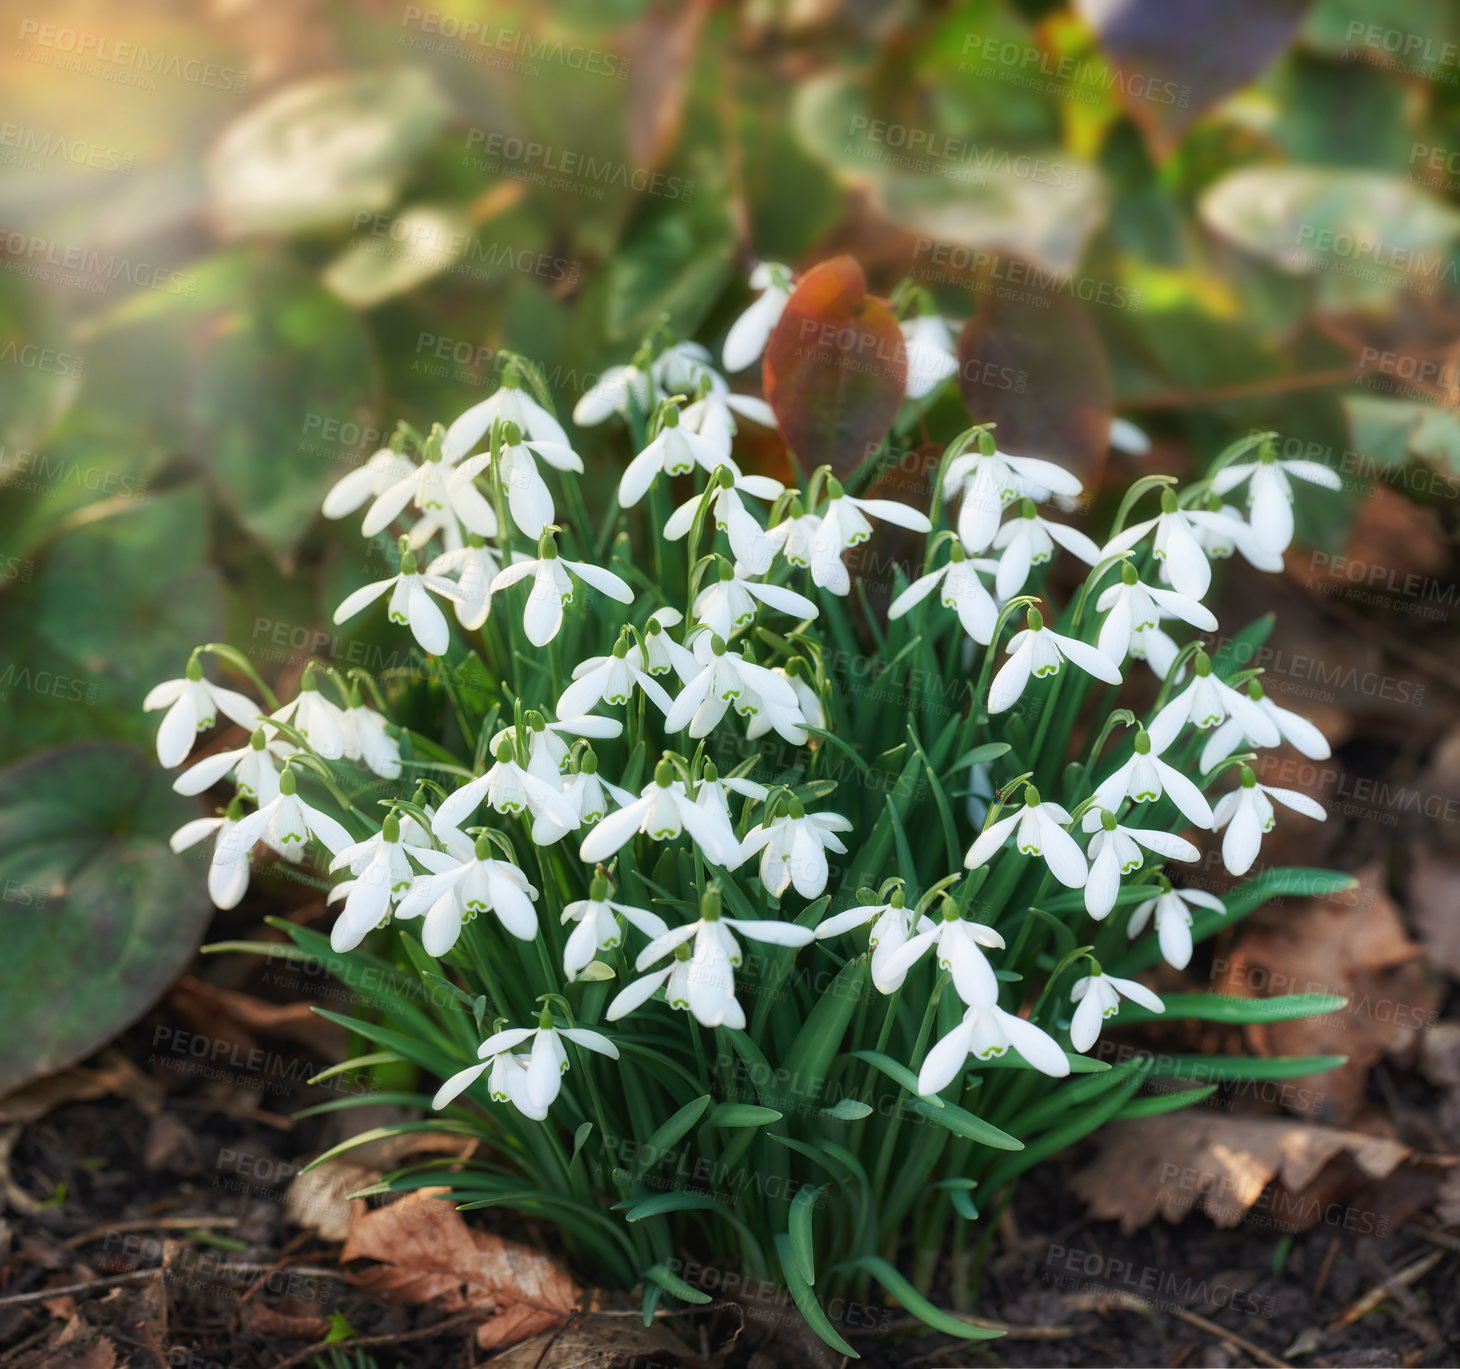 Buy stock photo Galanthus nivalis was described by the Swedish botanist Carl Linnaeus in his Species Plantarum in 1753, and given the specific epithet nivalis, meaning snowy (Galanthus means with milk-white flowers).